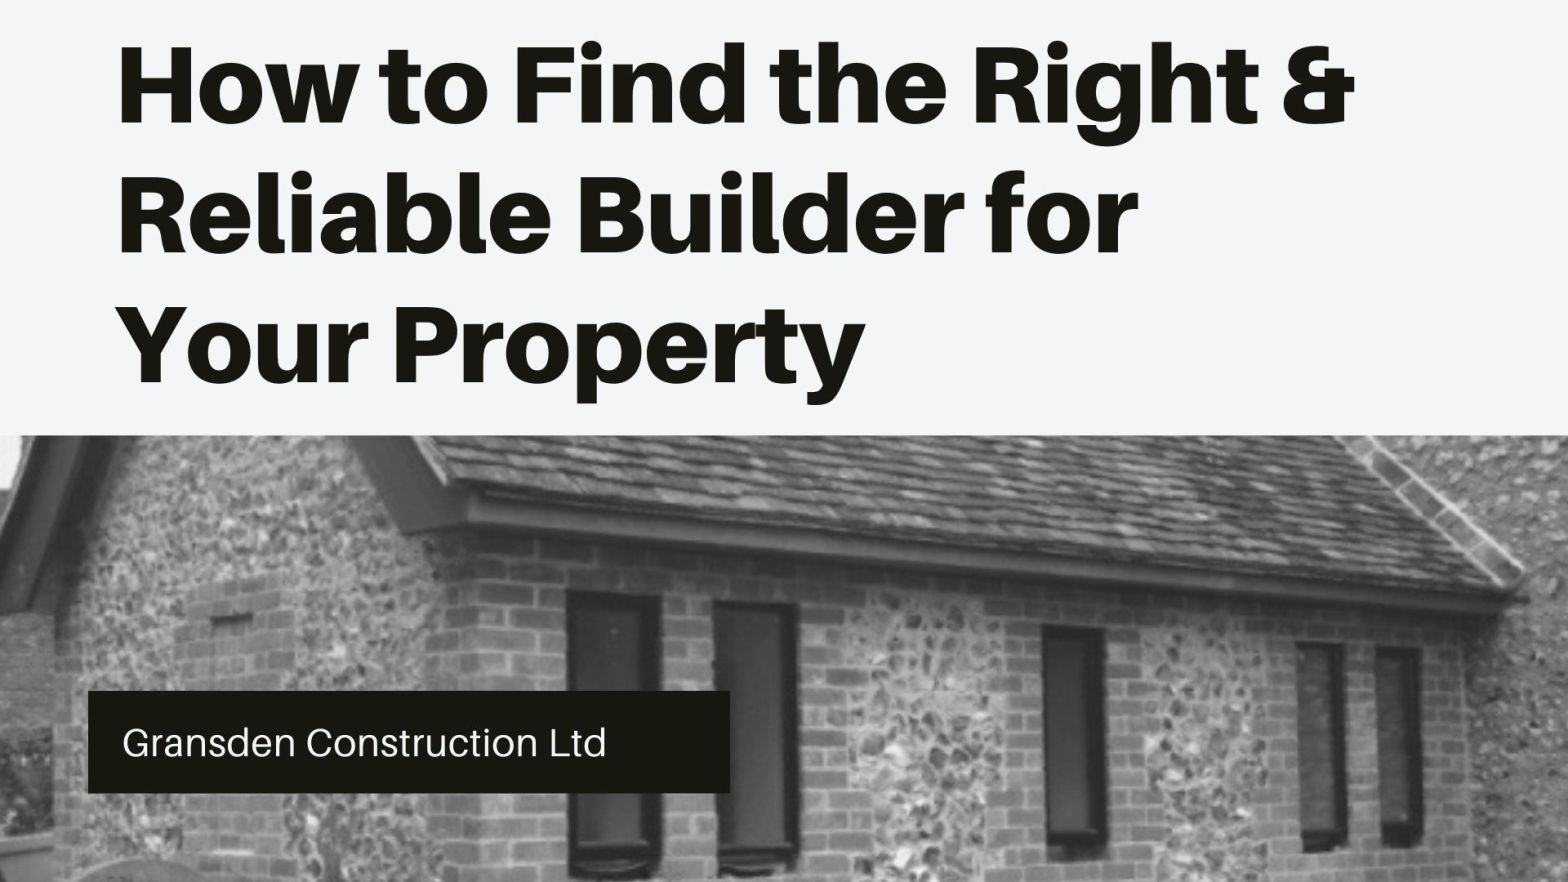 5 Simple Steps to Find New Construction ...blog.newhomeguide.com